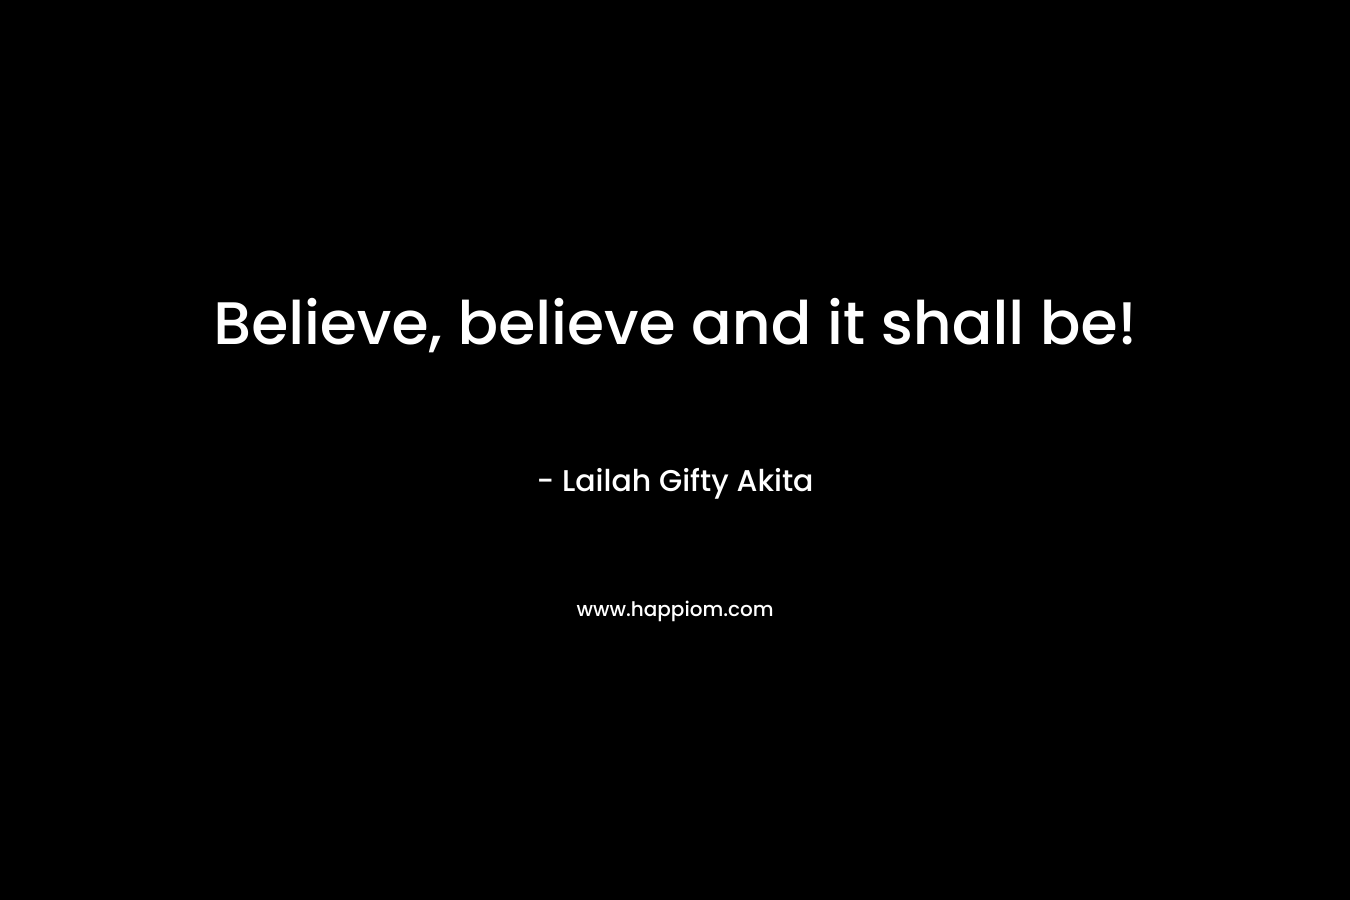 Believe, believe and it shall be!